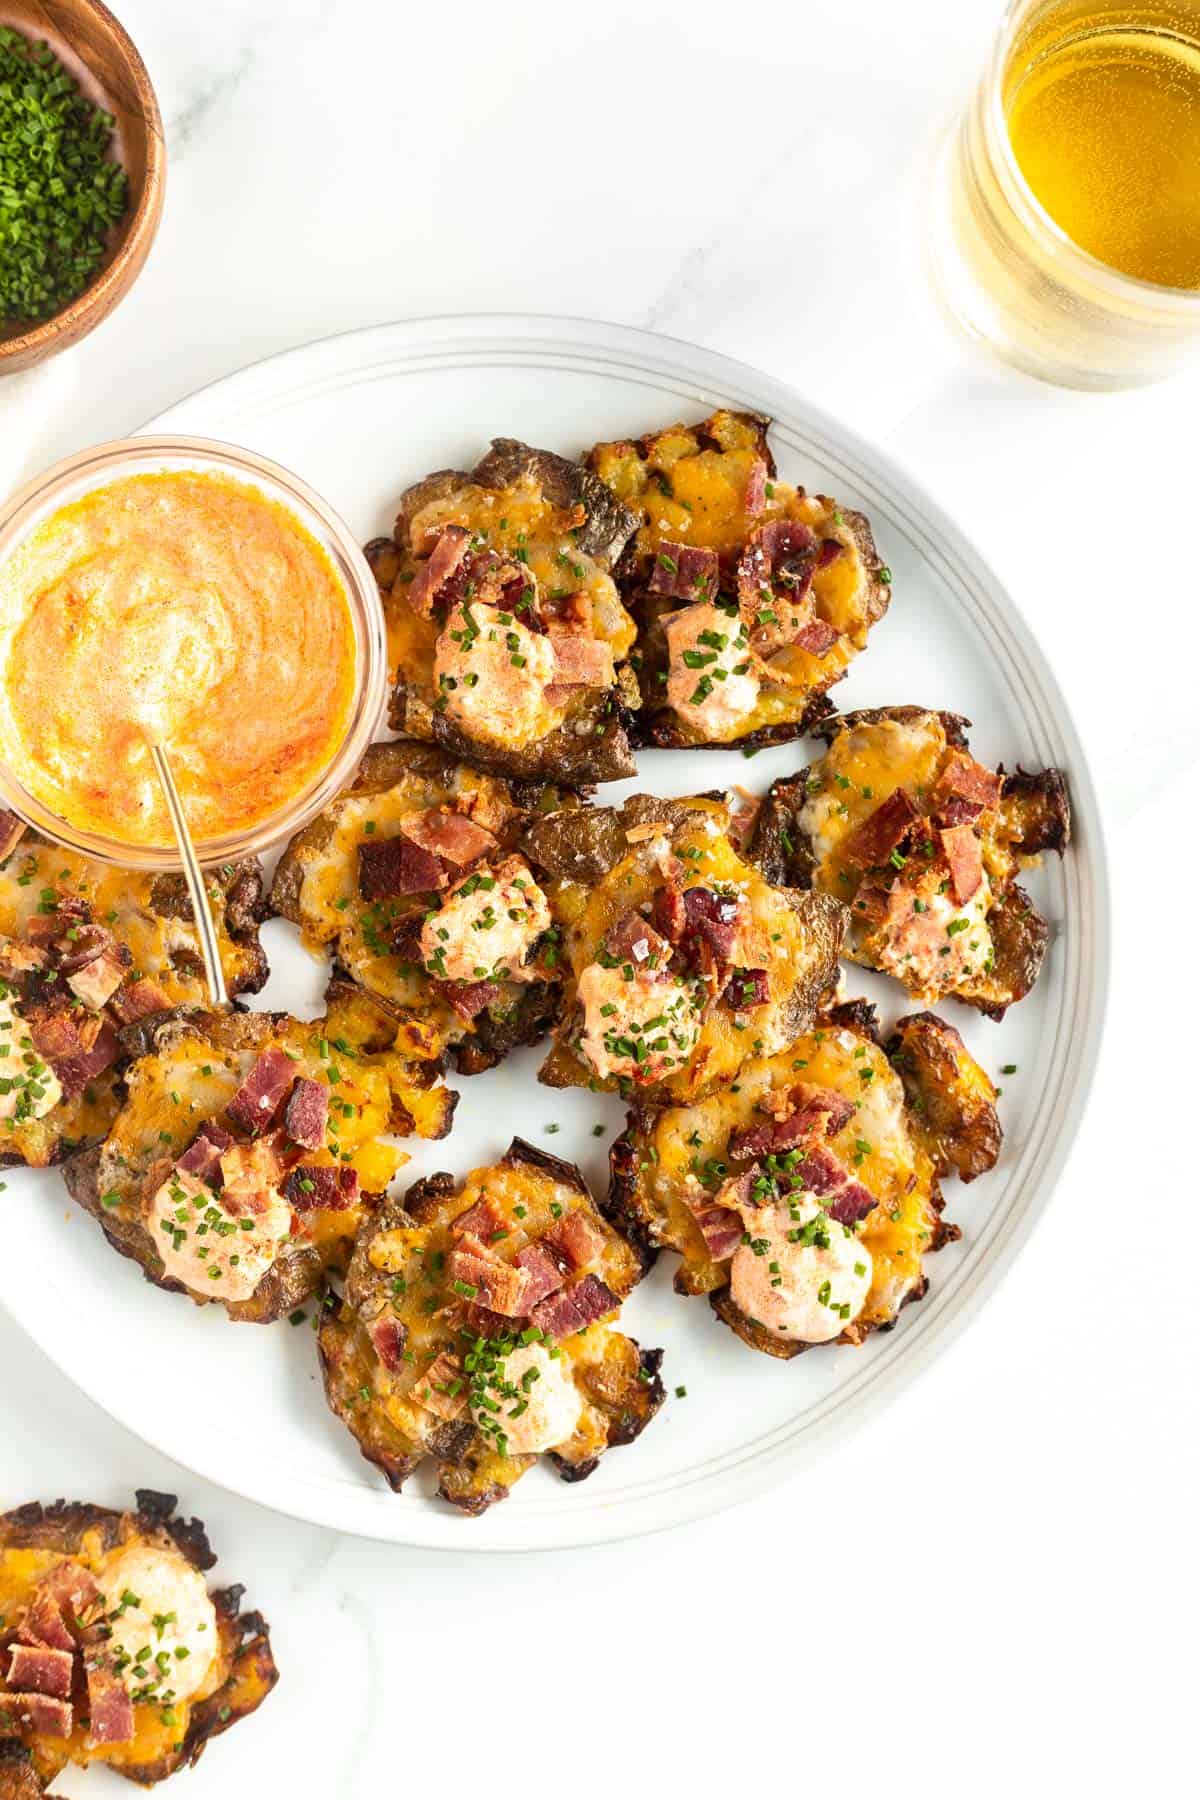 Cheesy smashed potatoes on a plate topped with bacon and chives.